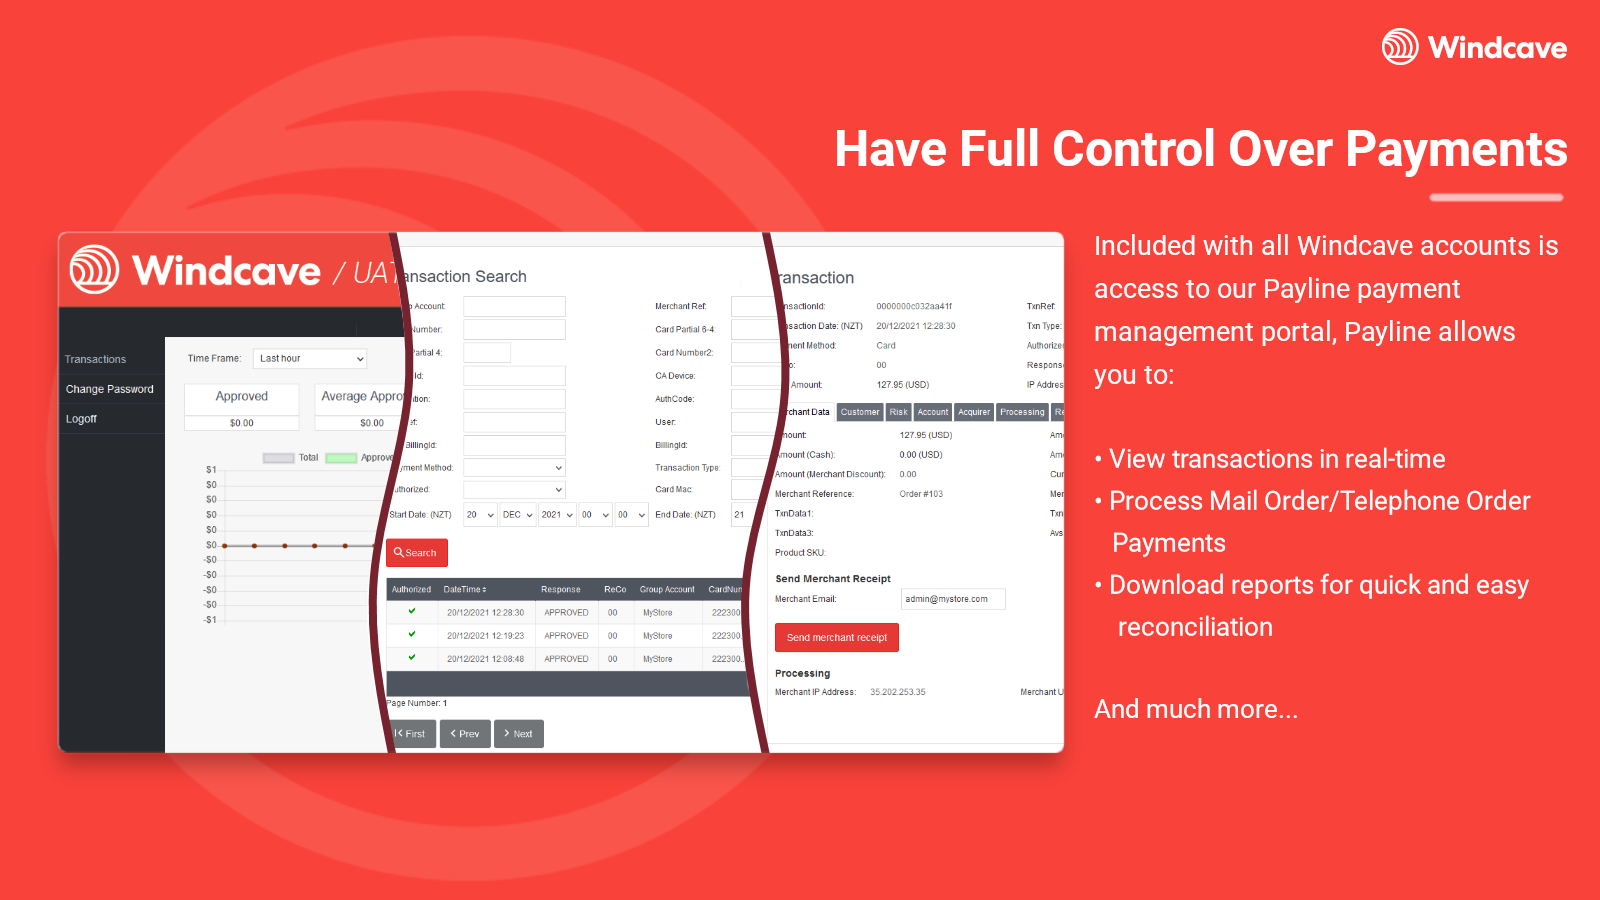 Have Full Control Over Payments